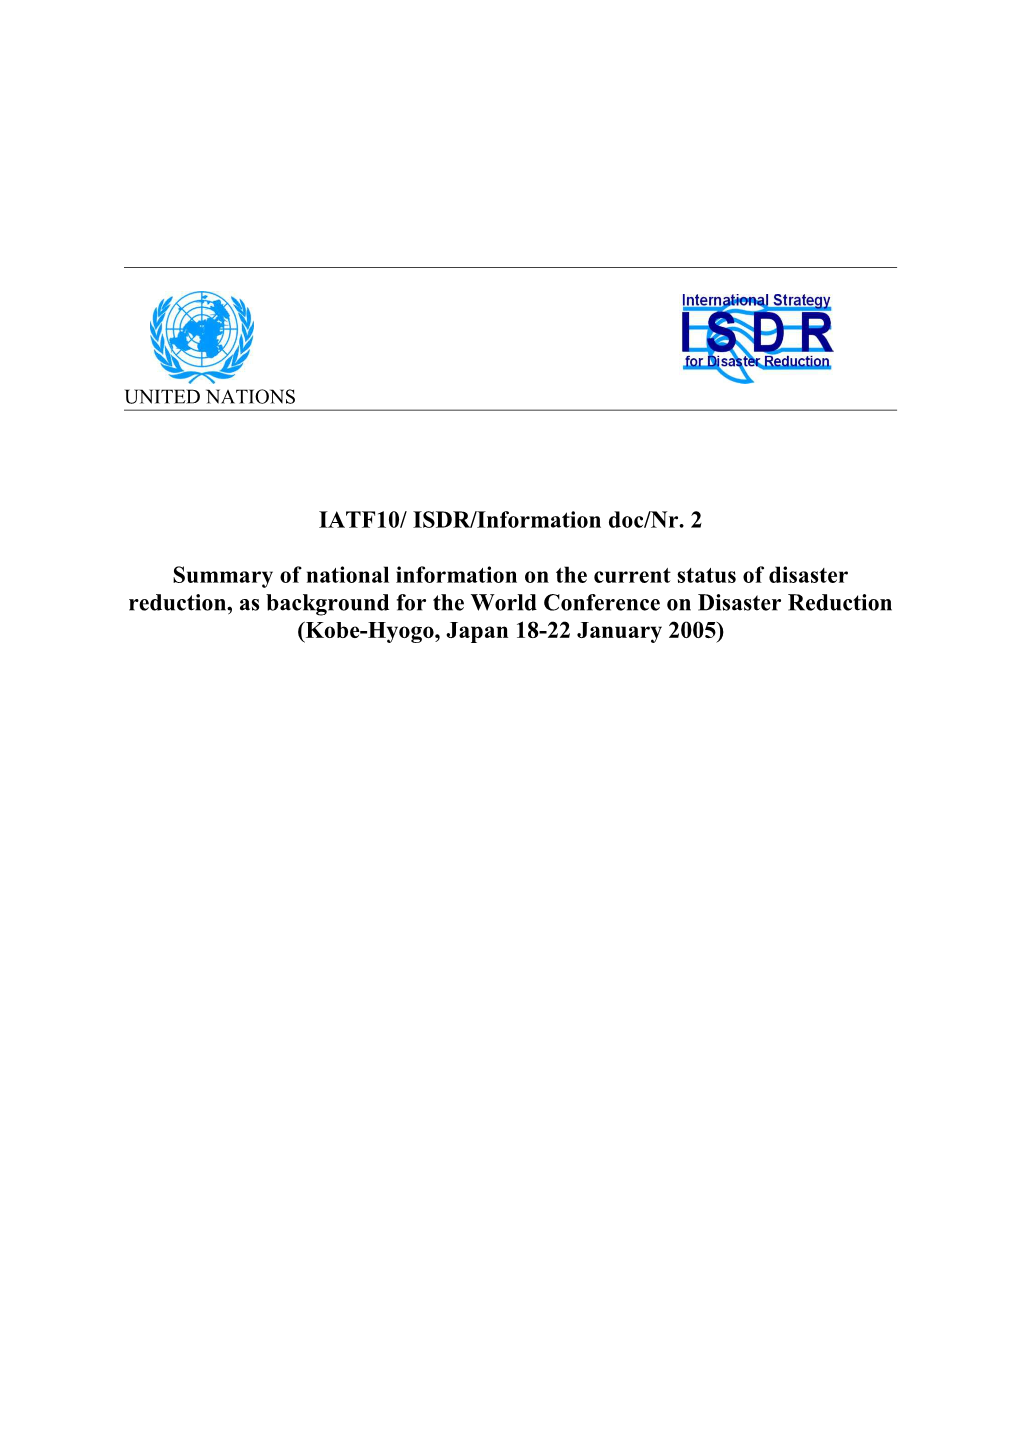 Report on National Information Received on Disaster Reduction for the World Conference